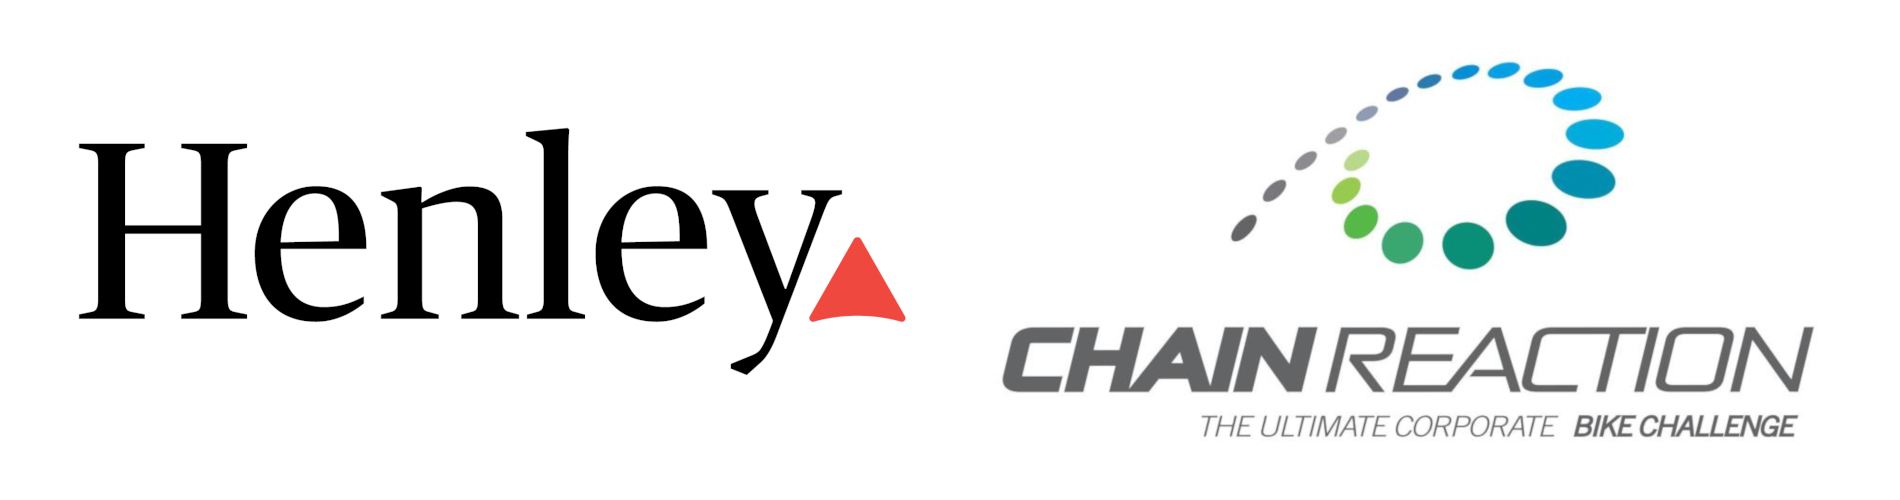 Henley and Chain Reaction Logos